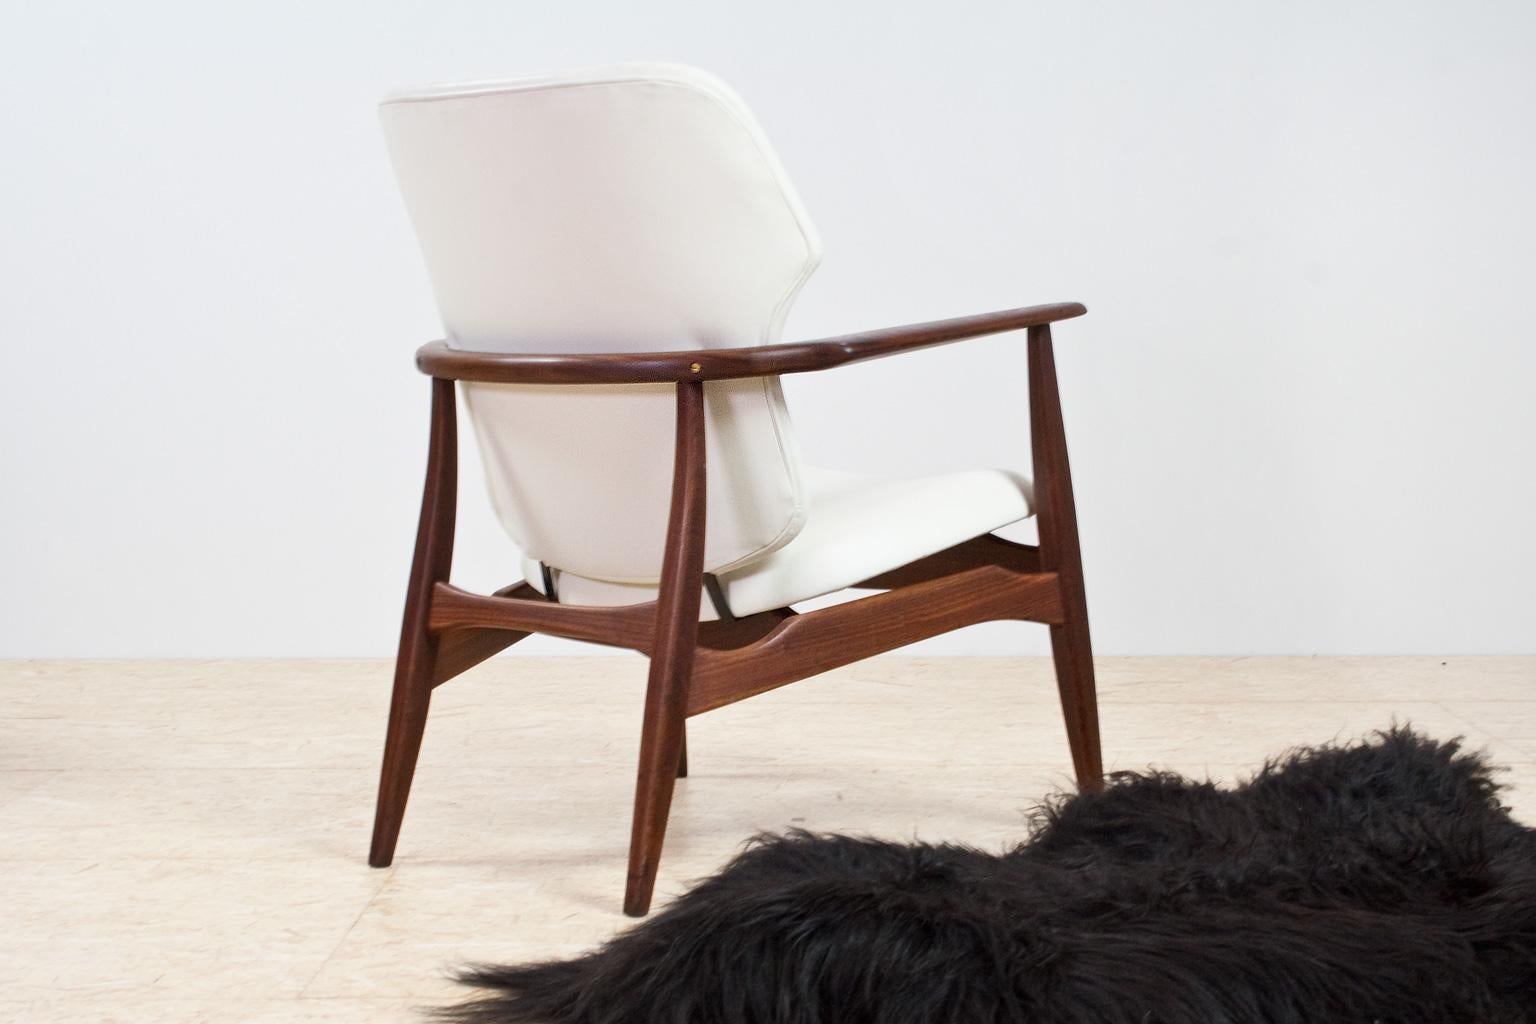 Dutch Mid-Century Modern Chair in Teak and White Leather by Aksel Bender Madsen, 1960s